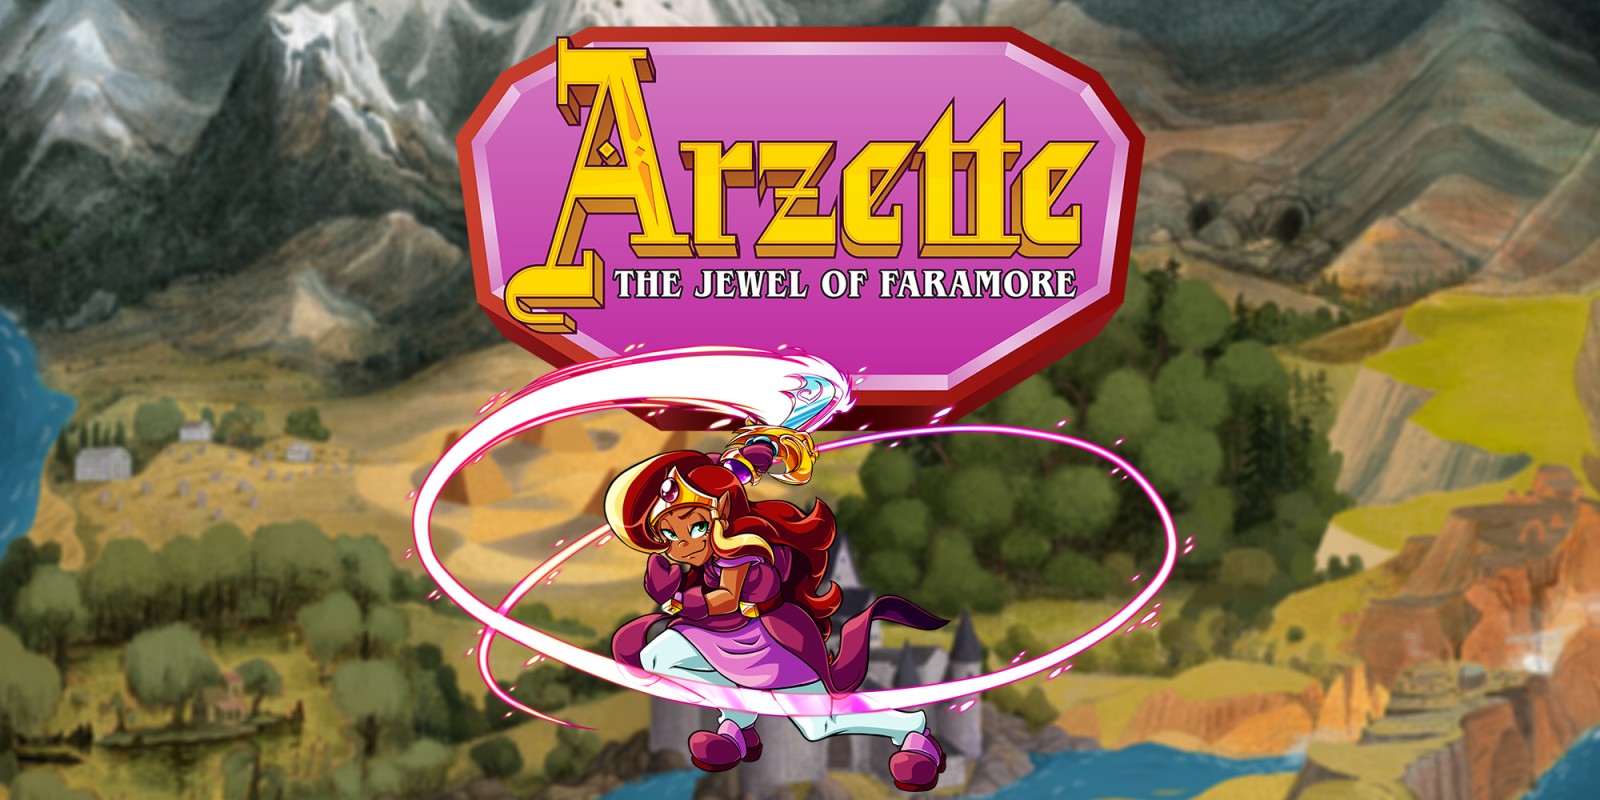 Arzette The Jewel of Faramore Collection PS4 Version Full Game Setup Free Download